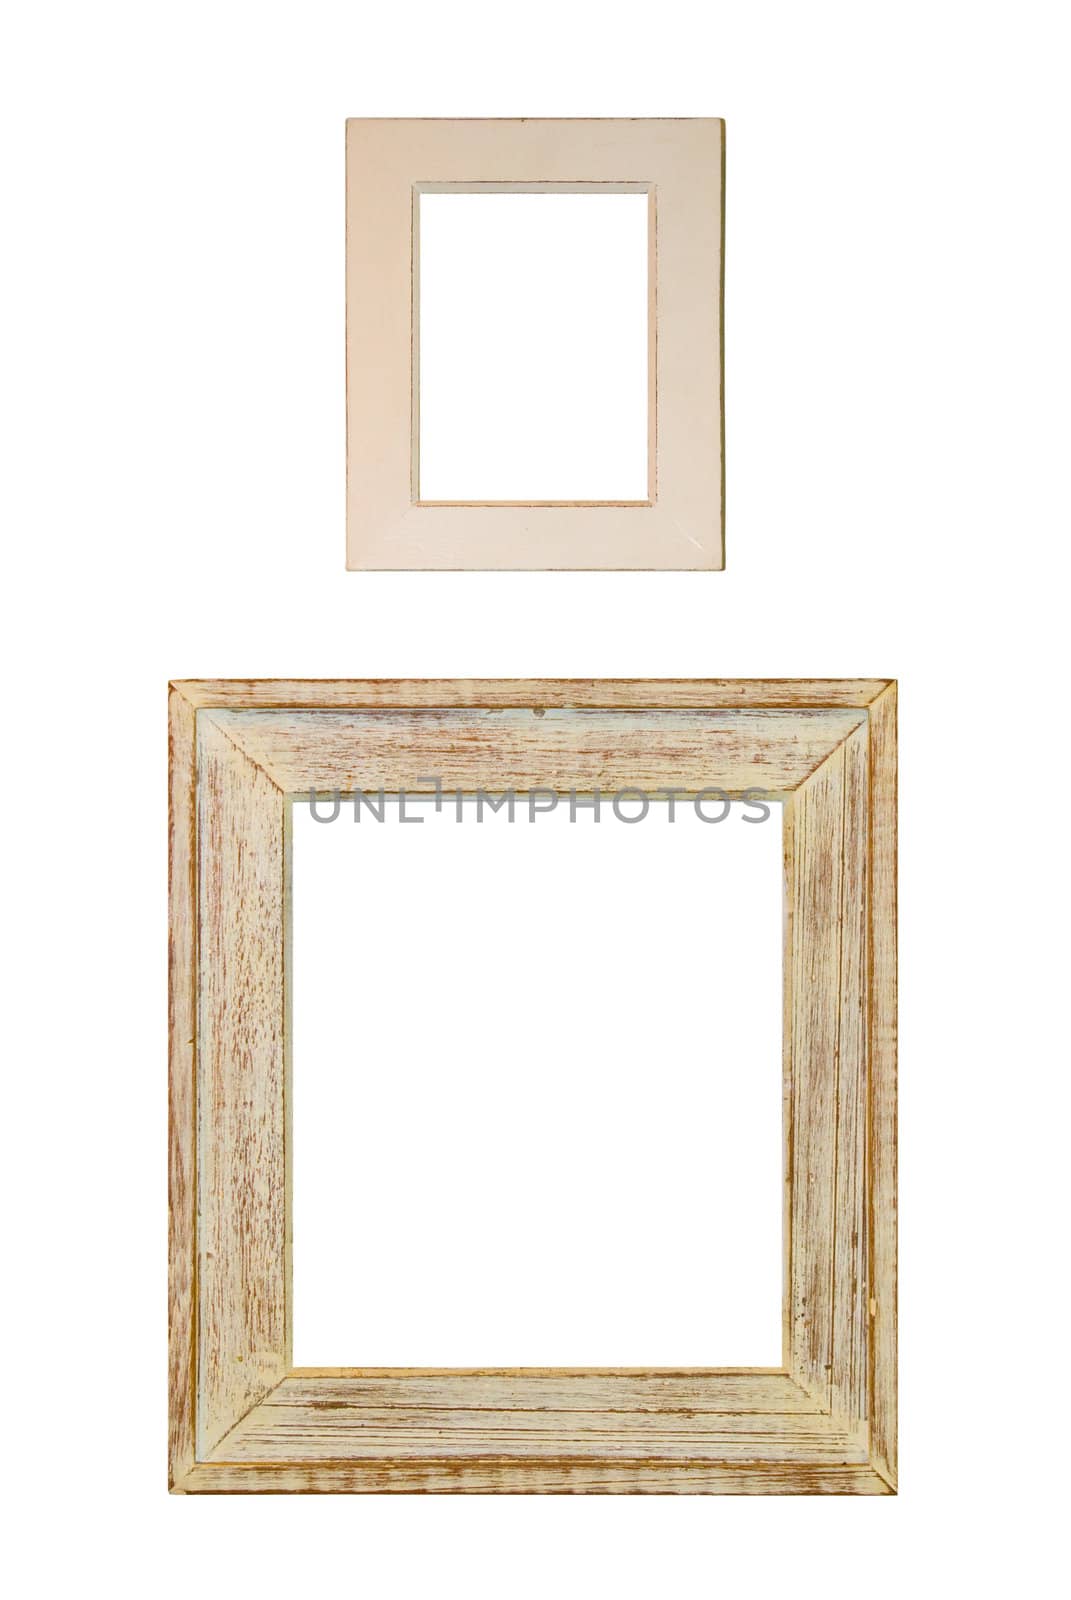 Vintage retro wooden picture frame, Isolated